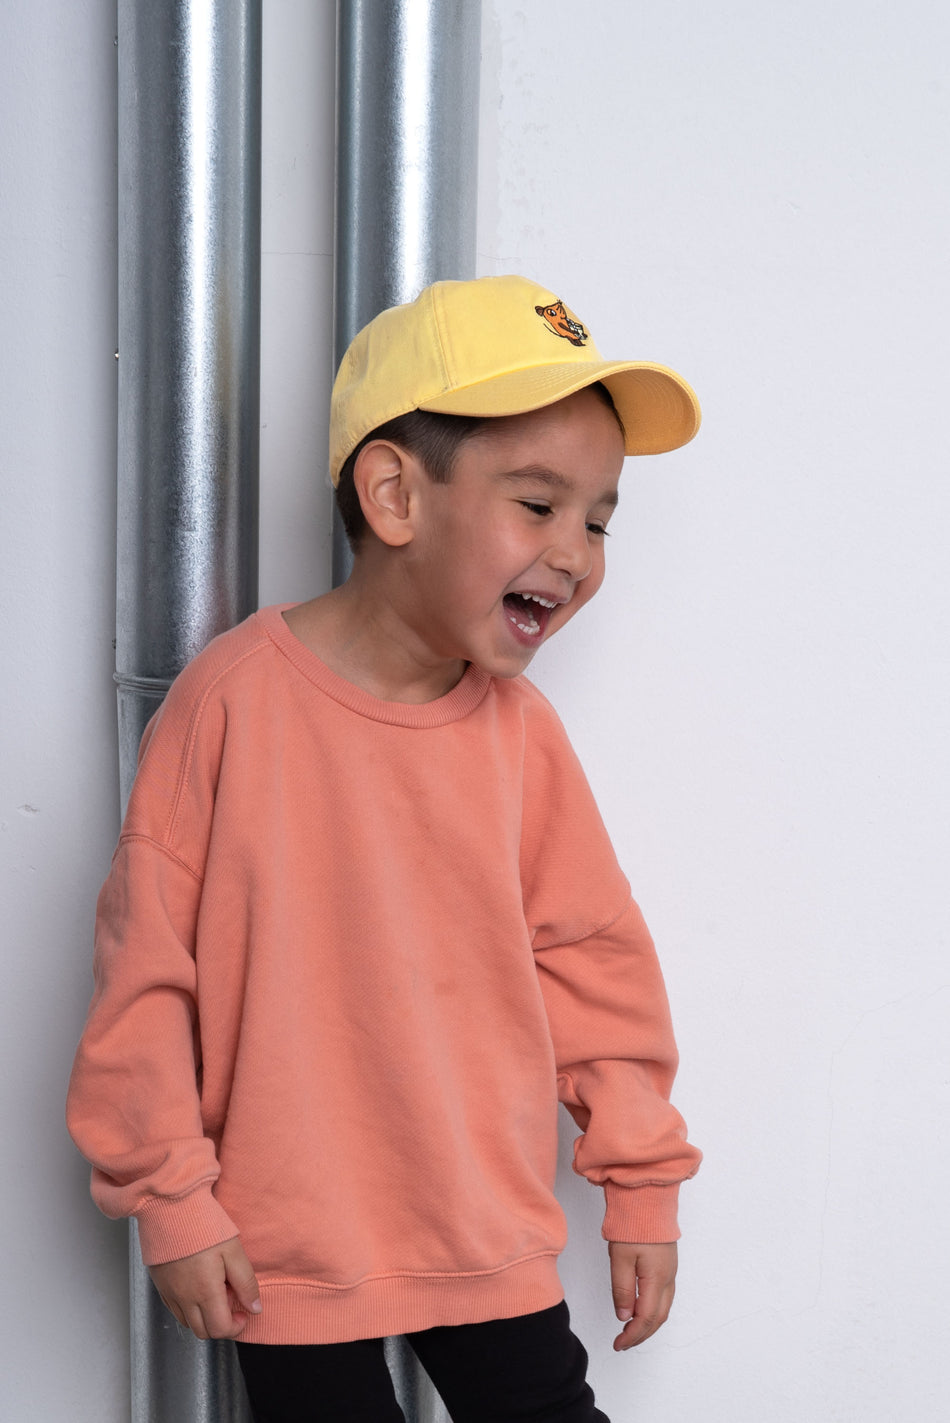 L&L – Maus Limo – '09 Polo Cap yellow Size: 1-3 YEARS